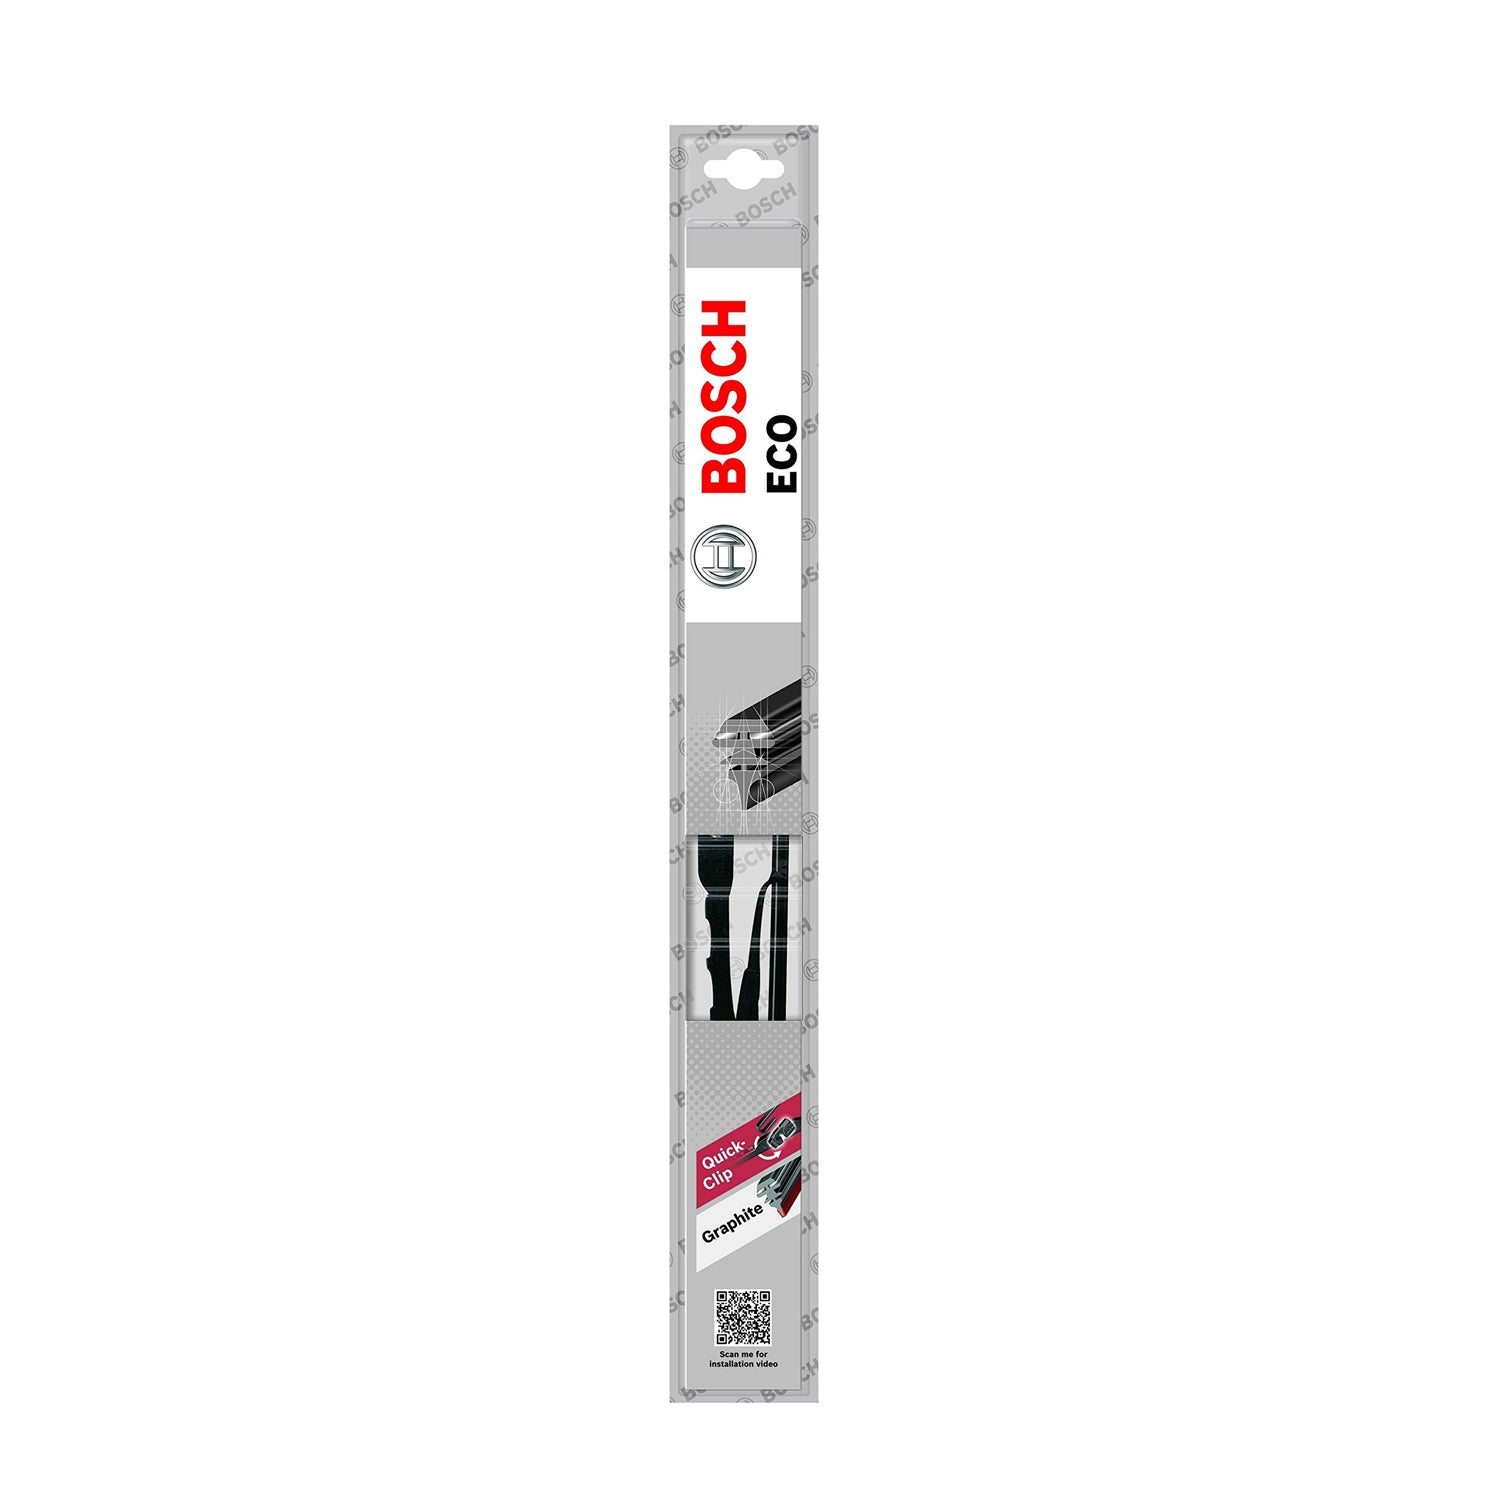 Bosch Eco Wiper Blade 3397010053-21 Inches and 19 inches Wiper blades For passenger cars - (Set of 2)